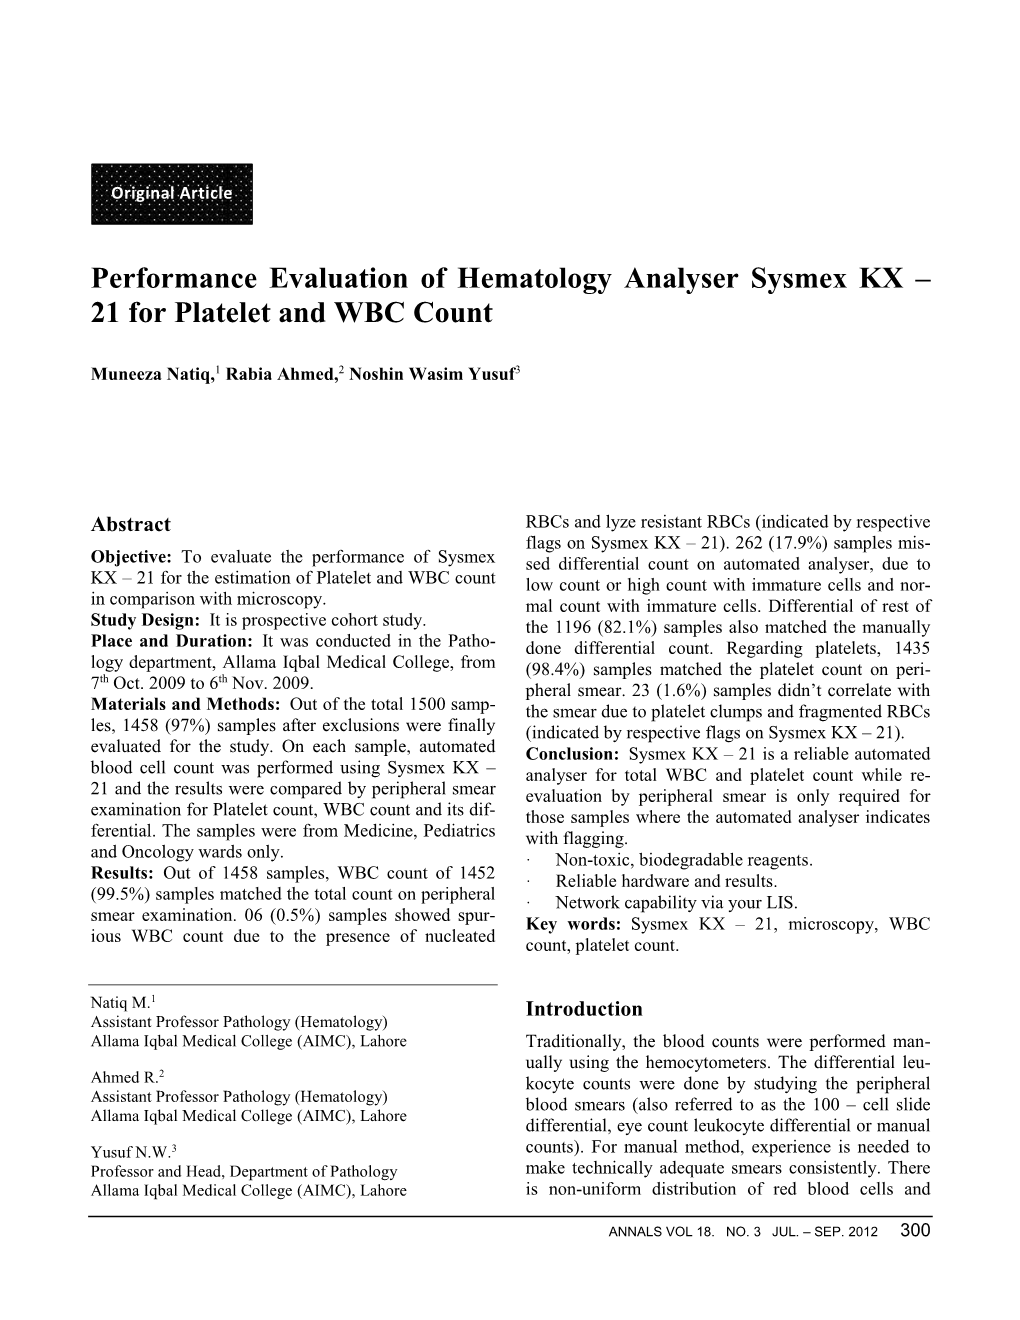 Performance Evaluation of Hematology Analyser Sysmex KX – 21 for Platelet and WBC Count